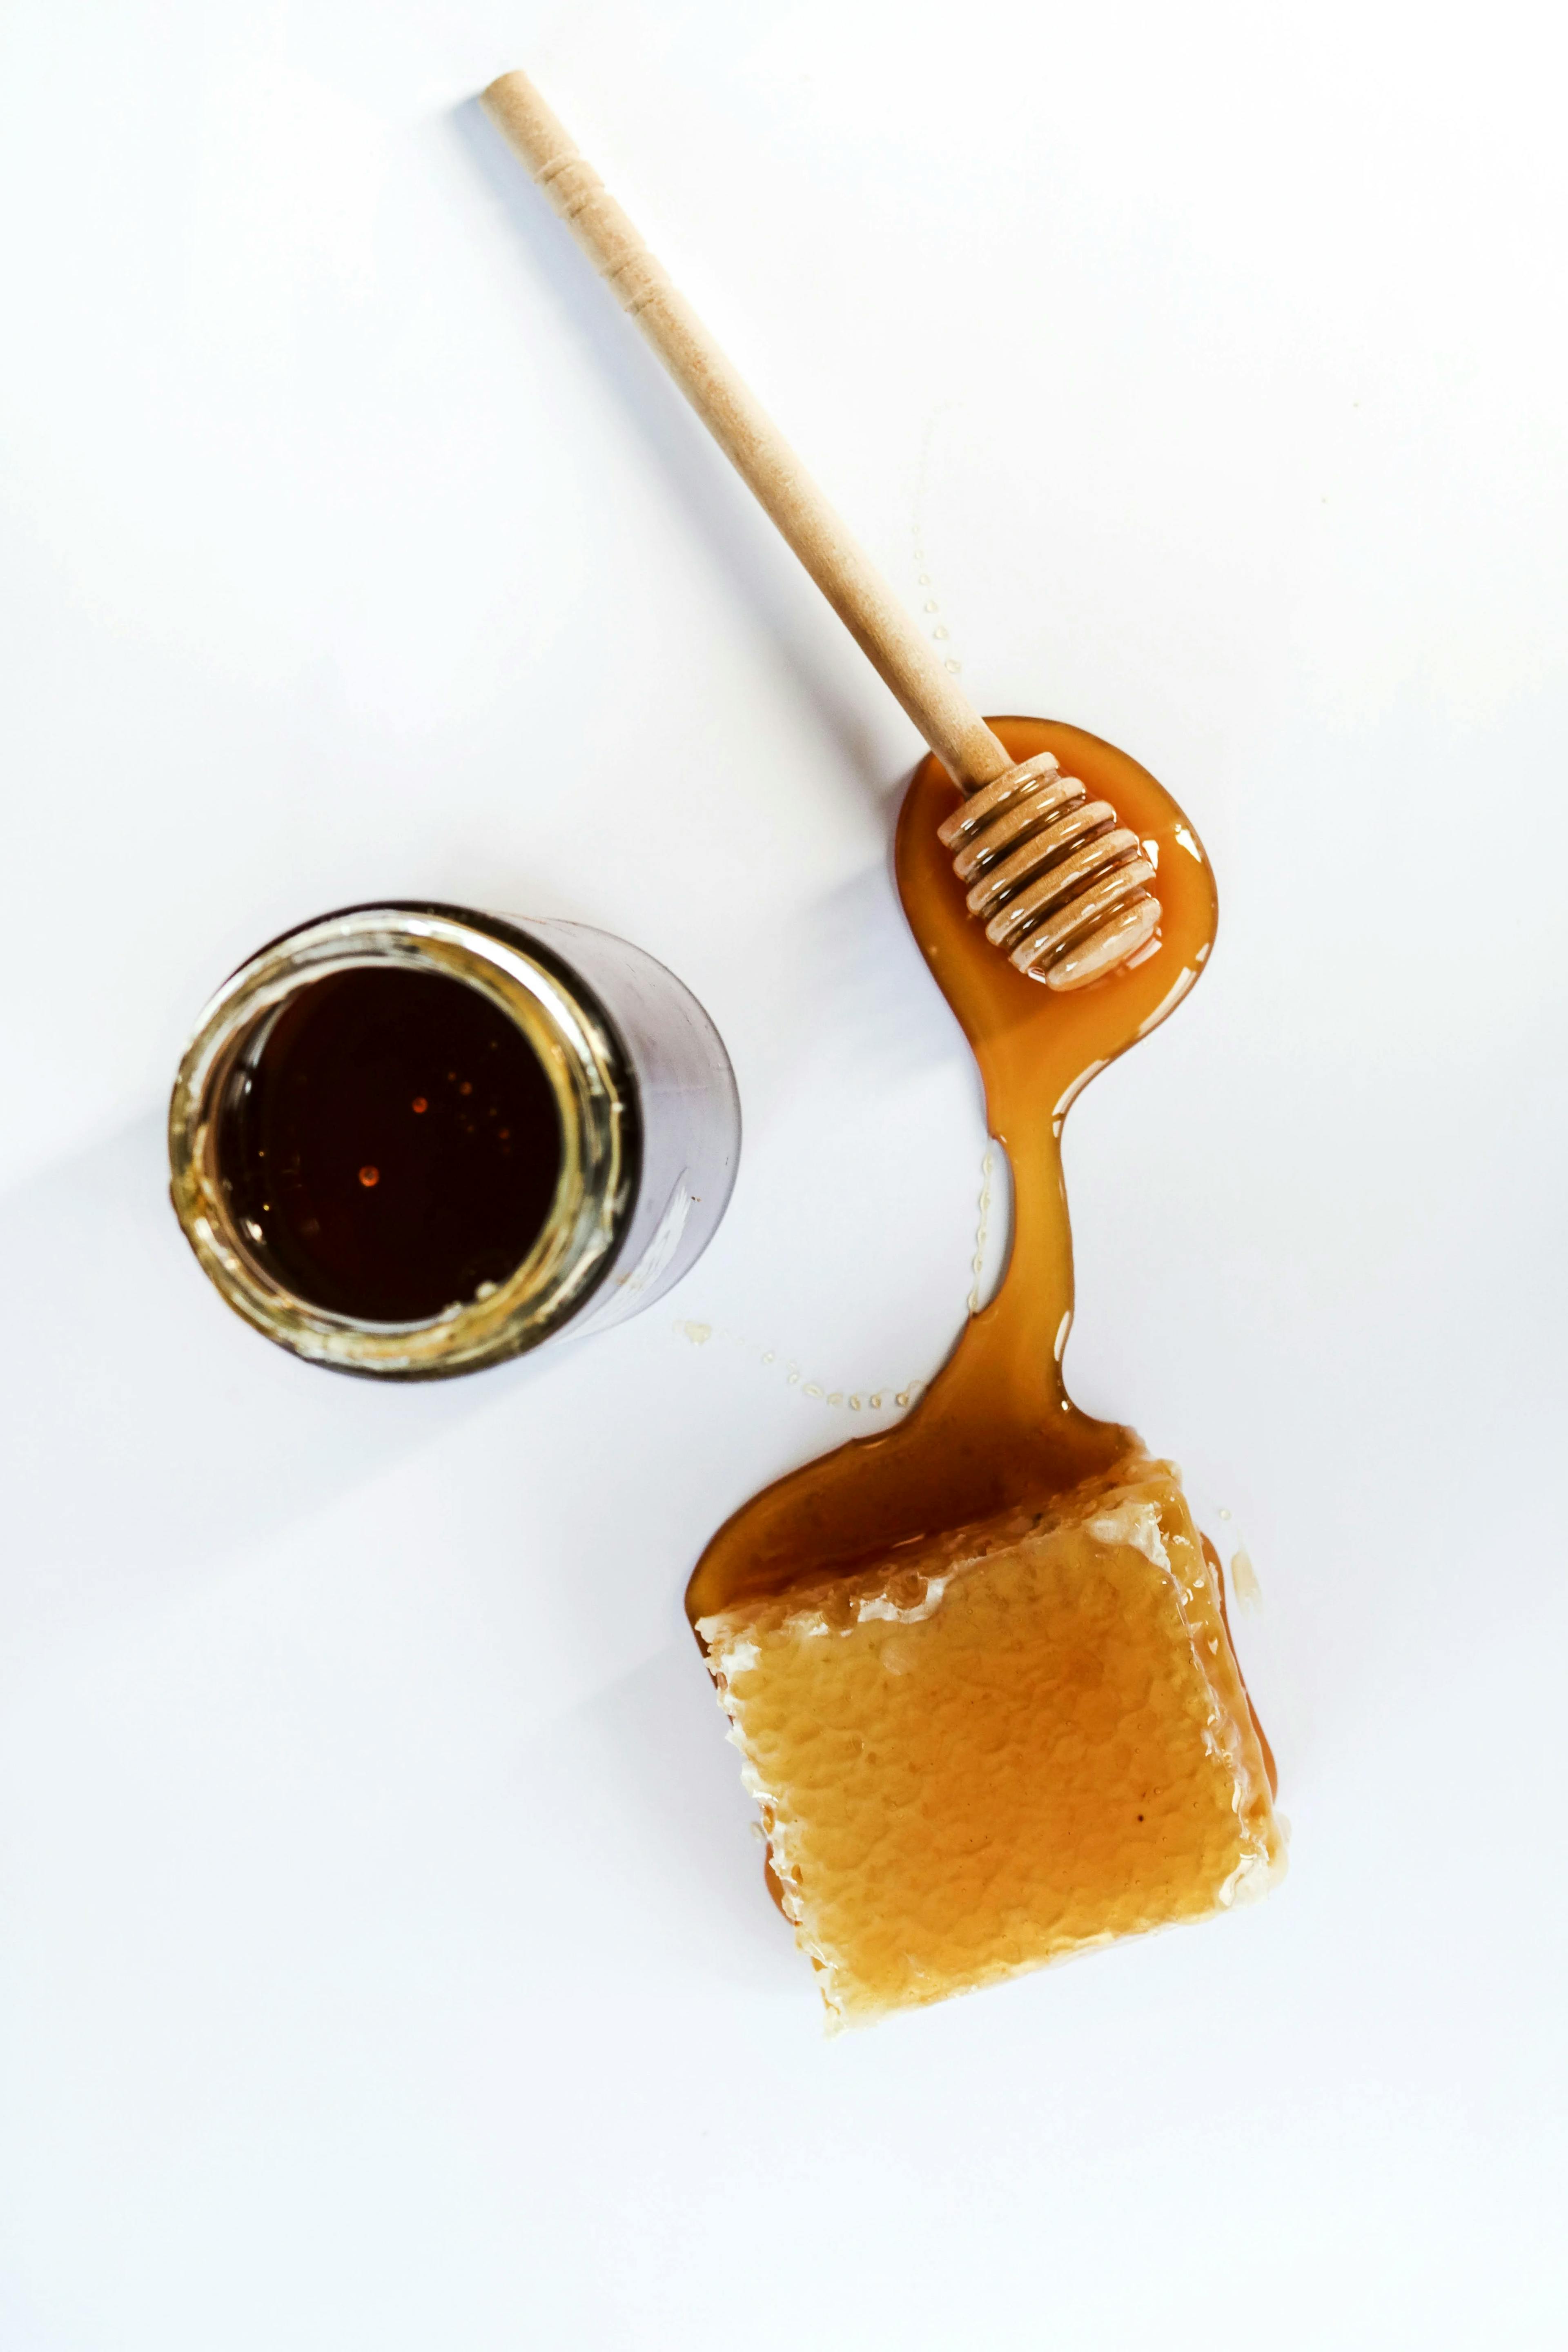  From Hive to Jar: The Process of Honey Production